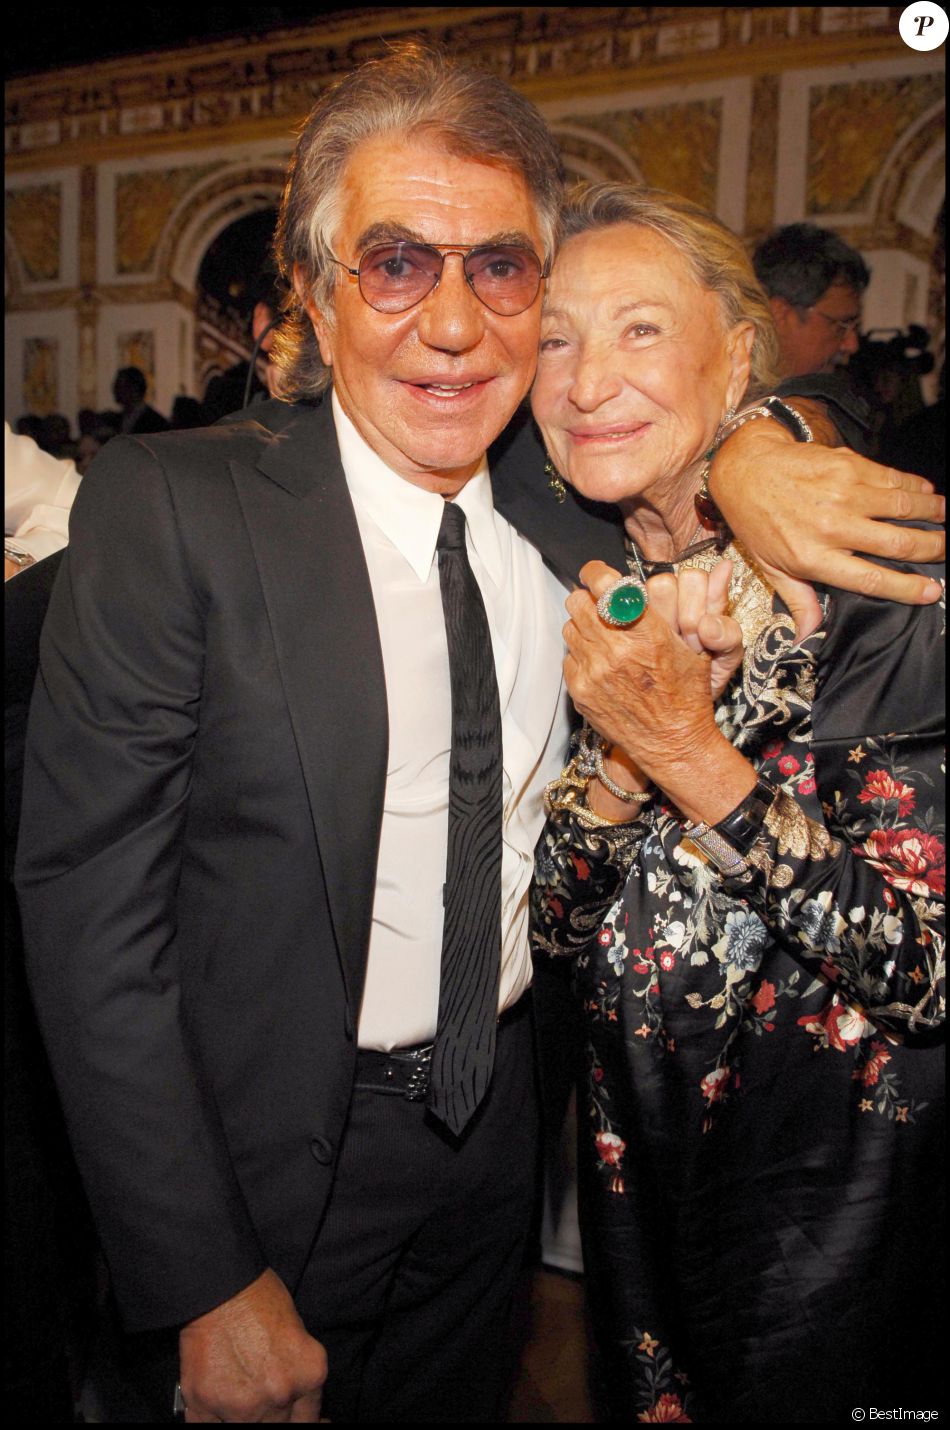 Royal Jewels of the World Message Board: Marta Marzotto has died